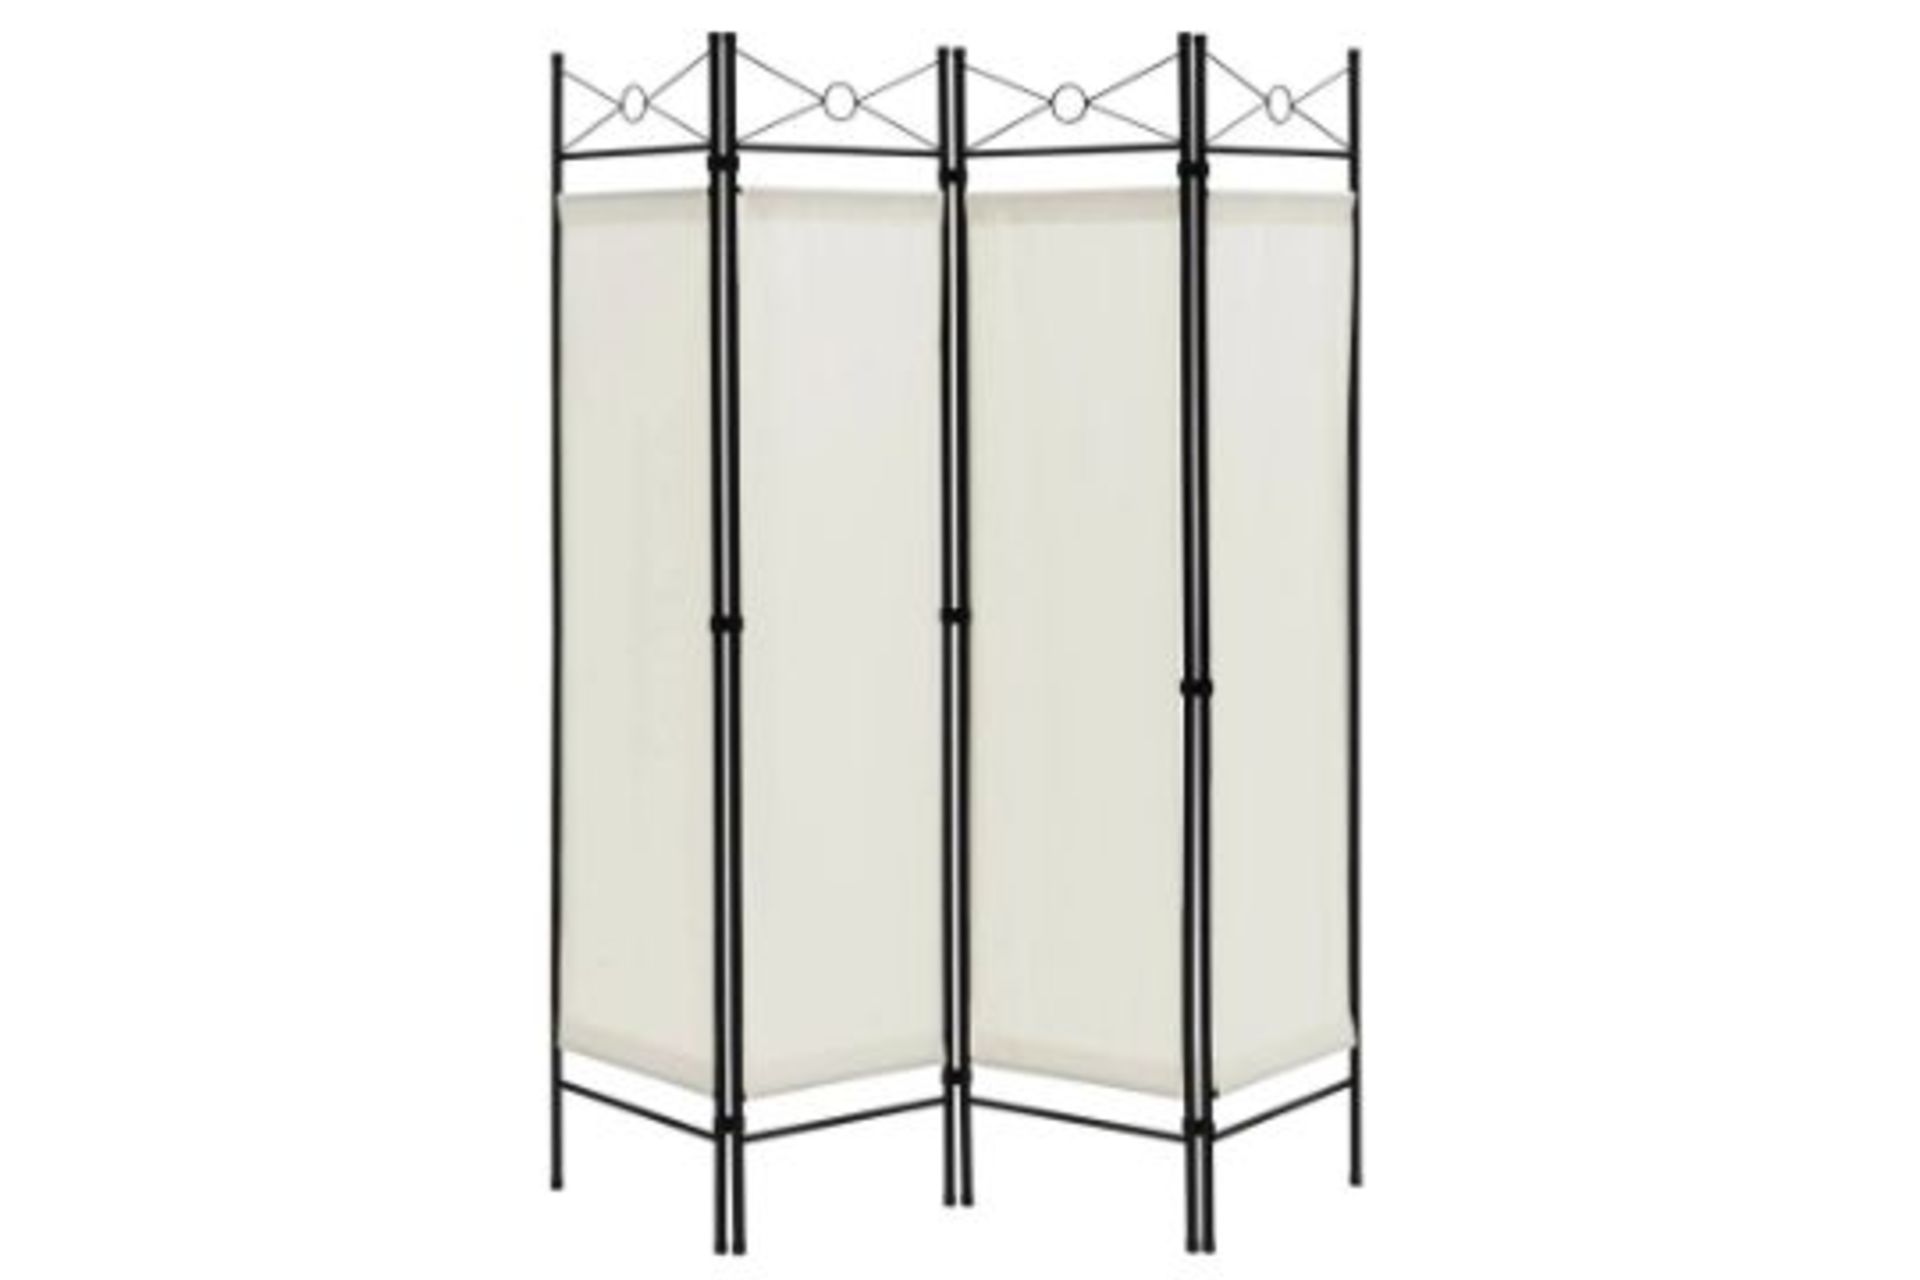 Luxury 6 Feet 4-Panel Folding Freestanding Room Divider. -R14.6. Create a privacy space anytime,